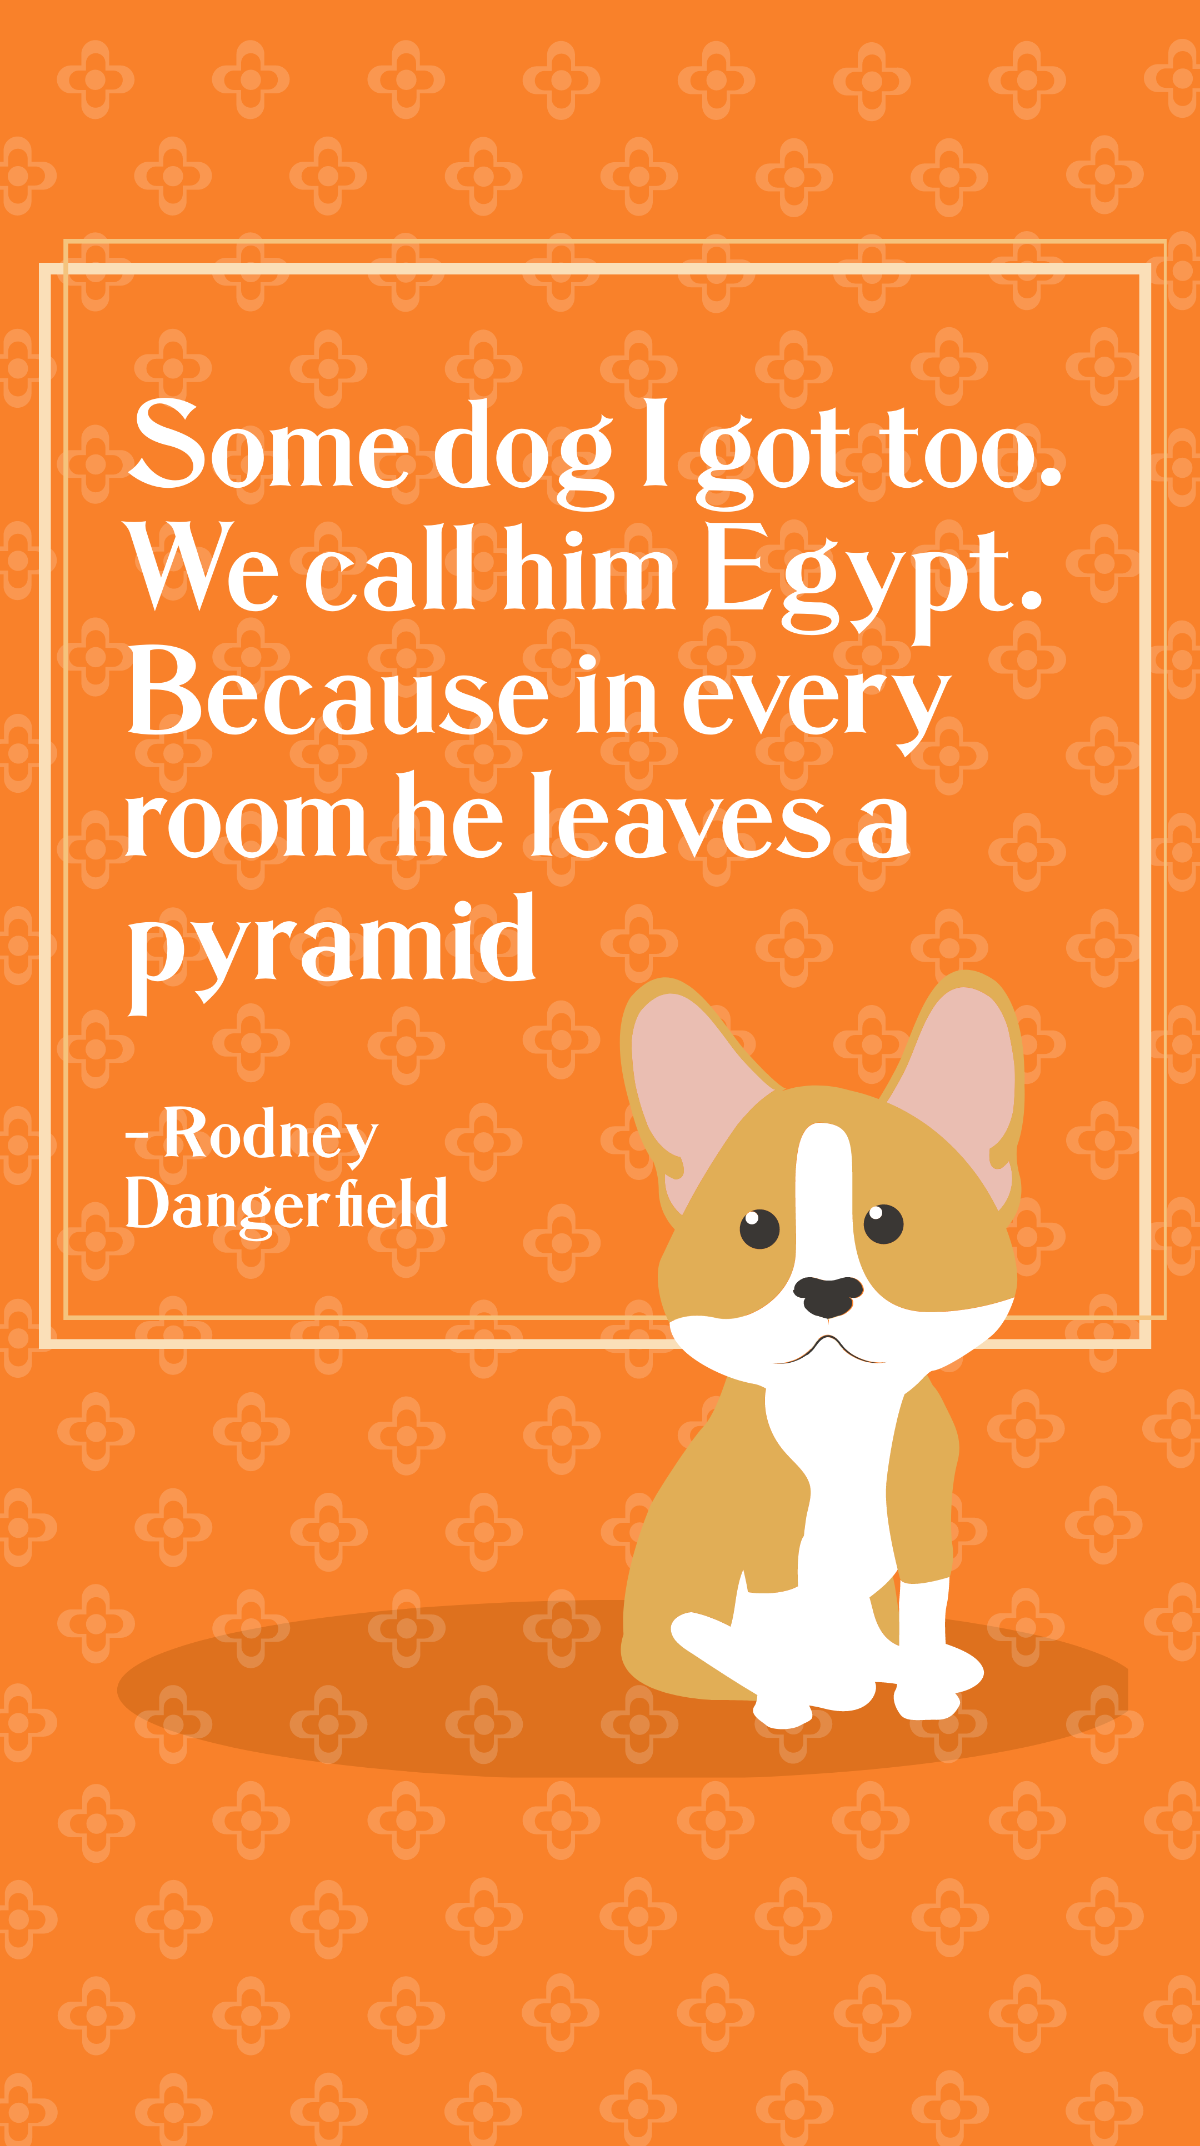 Rodney Dangerfield - Some dog I got too. We call him Egypt. Because in every room he leaves a pyramid Template